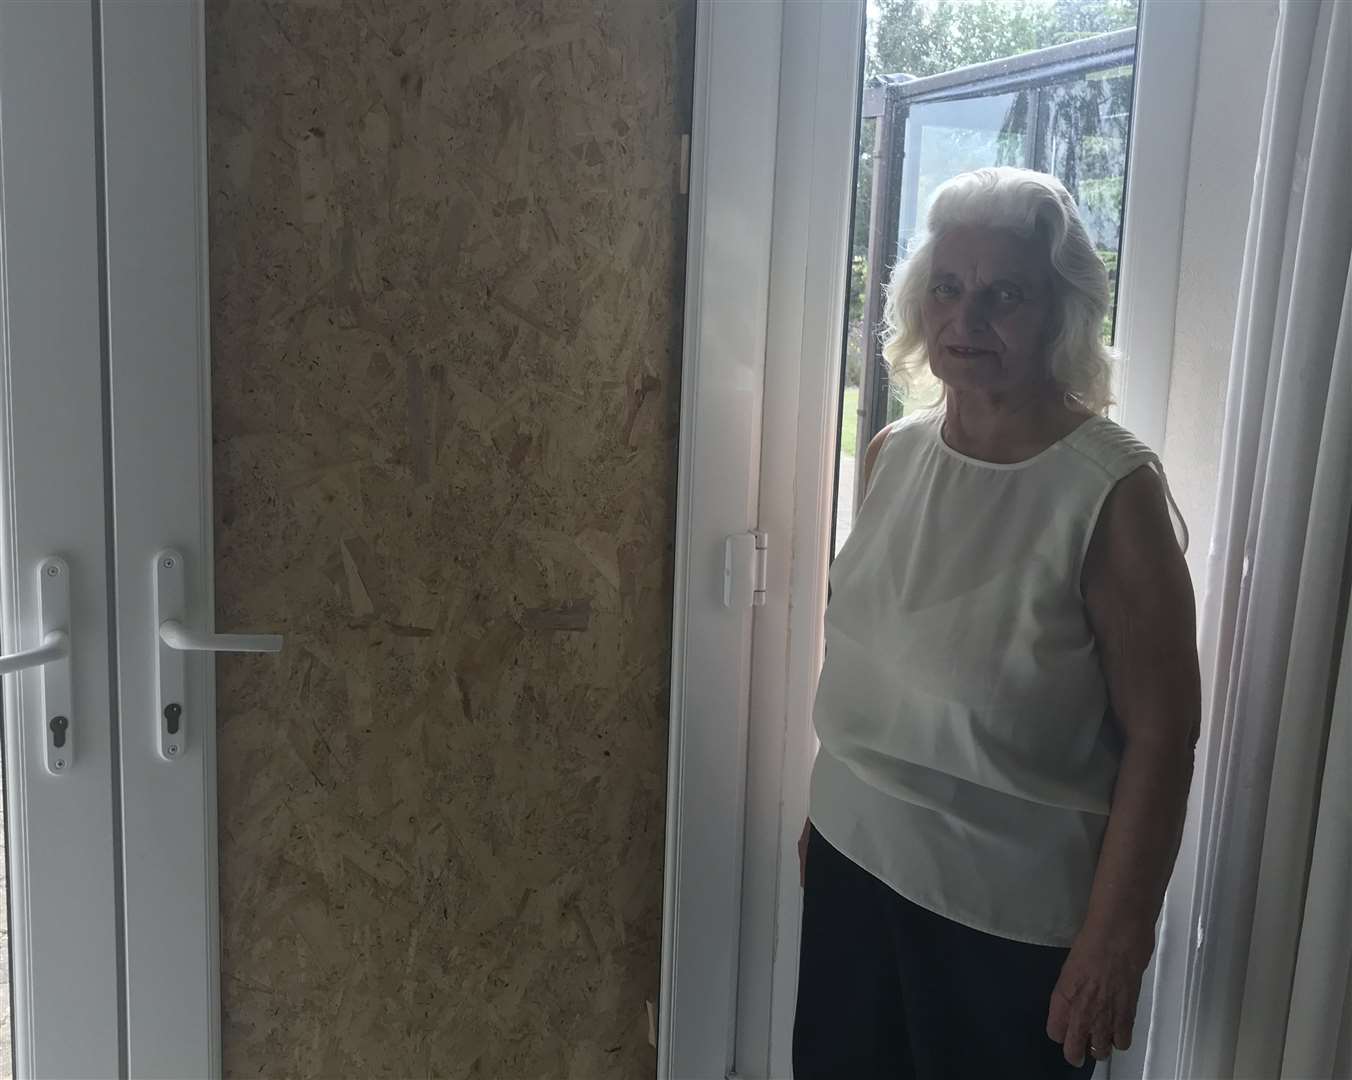 A pair of masked burglars broke into Joan Stone's house by shattering the patio door